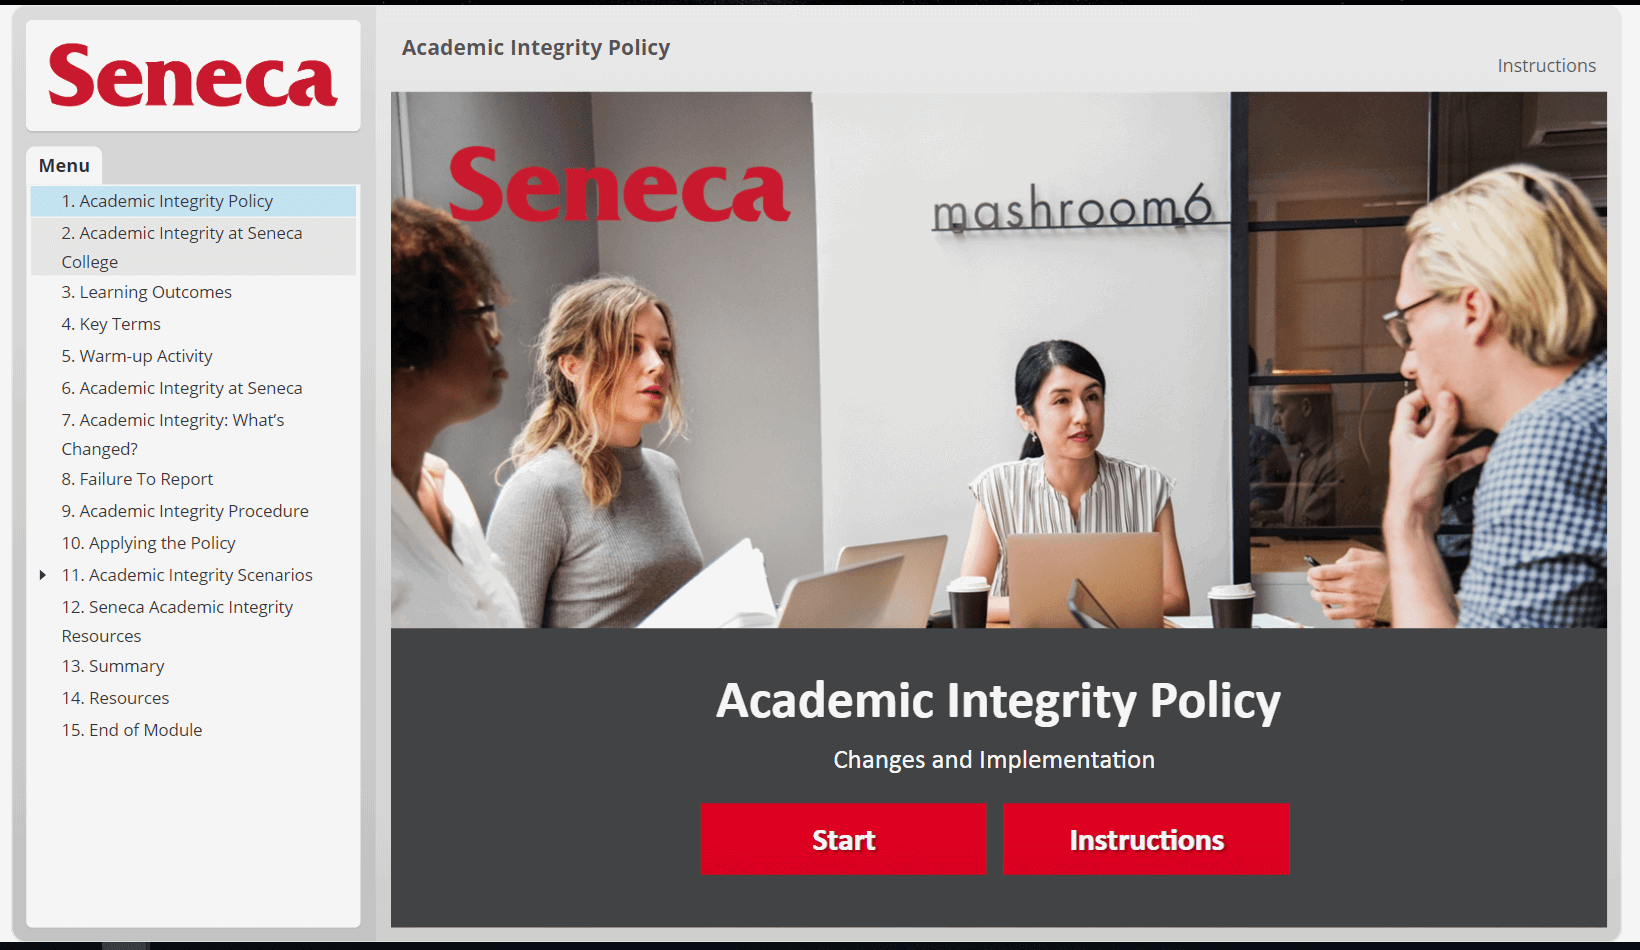 A screen capture of the academic integrity training module for faculty